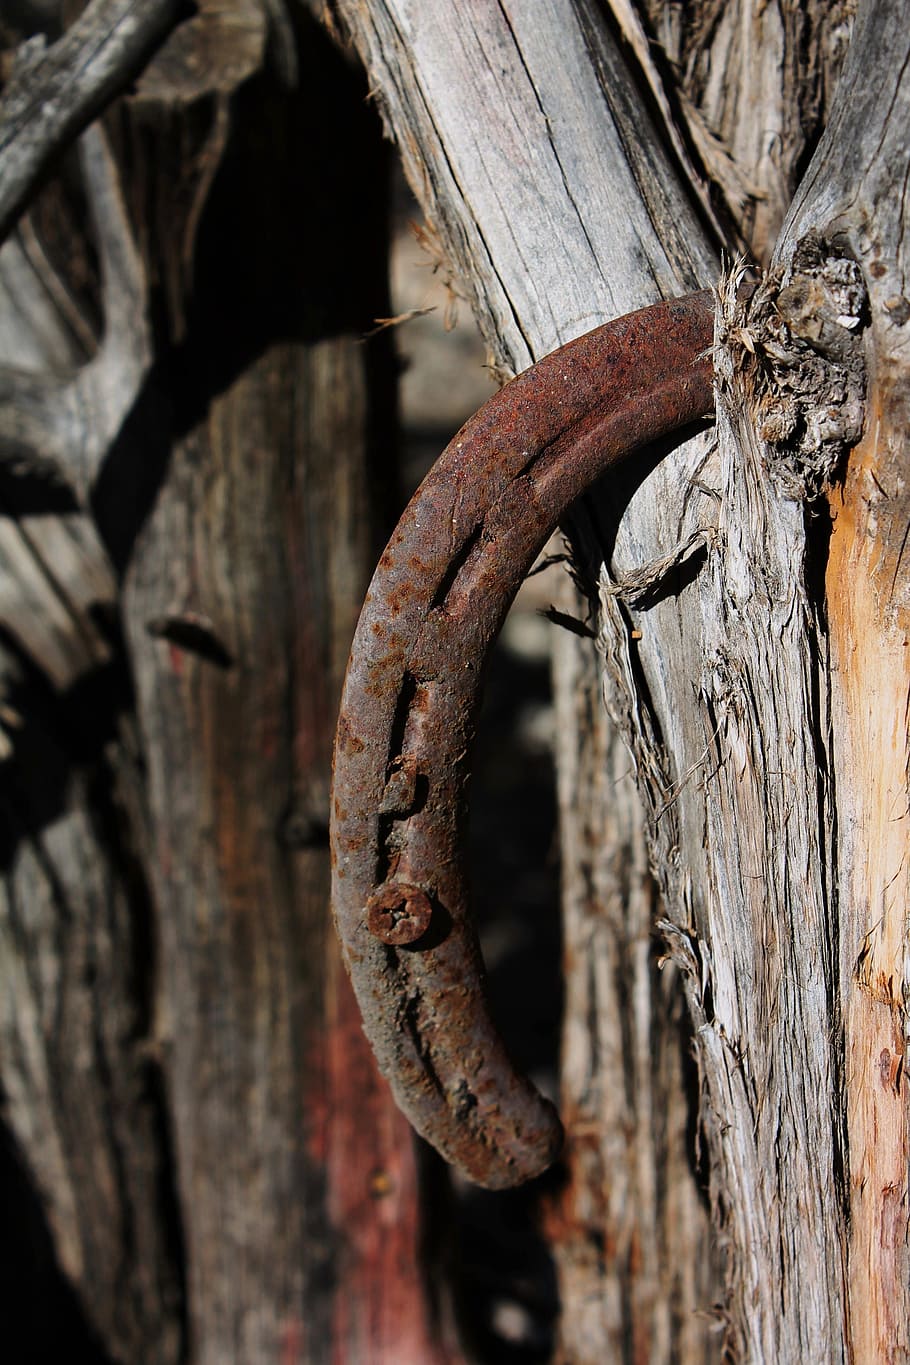 horseshoe, rusted, iron, vintage, antique, western, wooden, brown, horse shoe, good luck charm